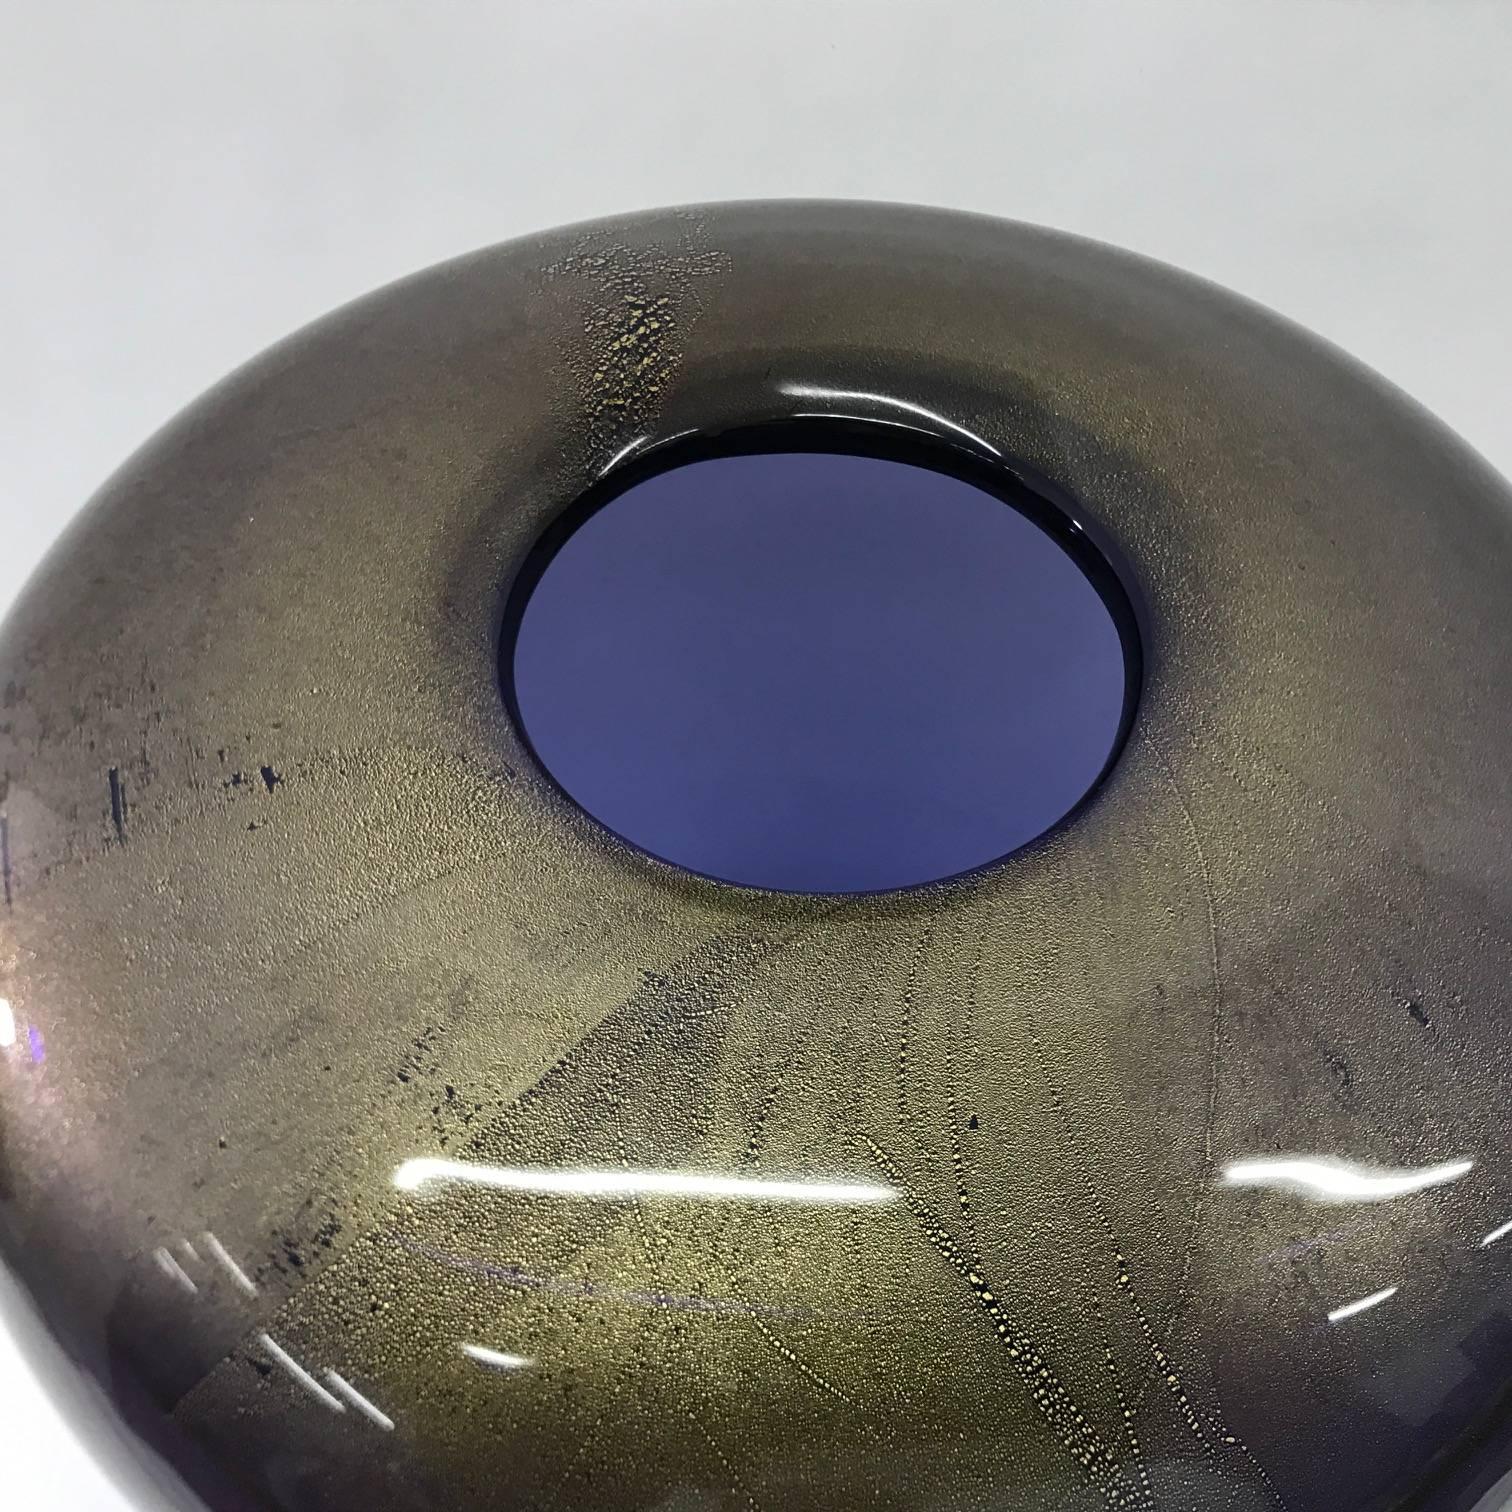 Vase from Venini, signed Laura Venini 2001, in perfect conditions, produced with a particular process and the use of pure gold inside the glass. The inside color is purple.